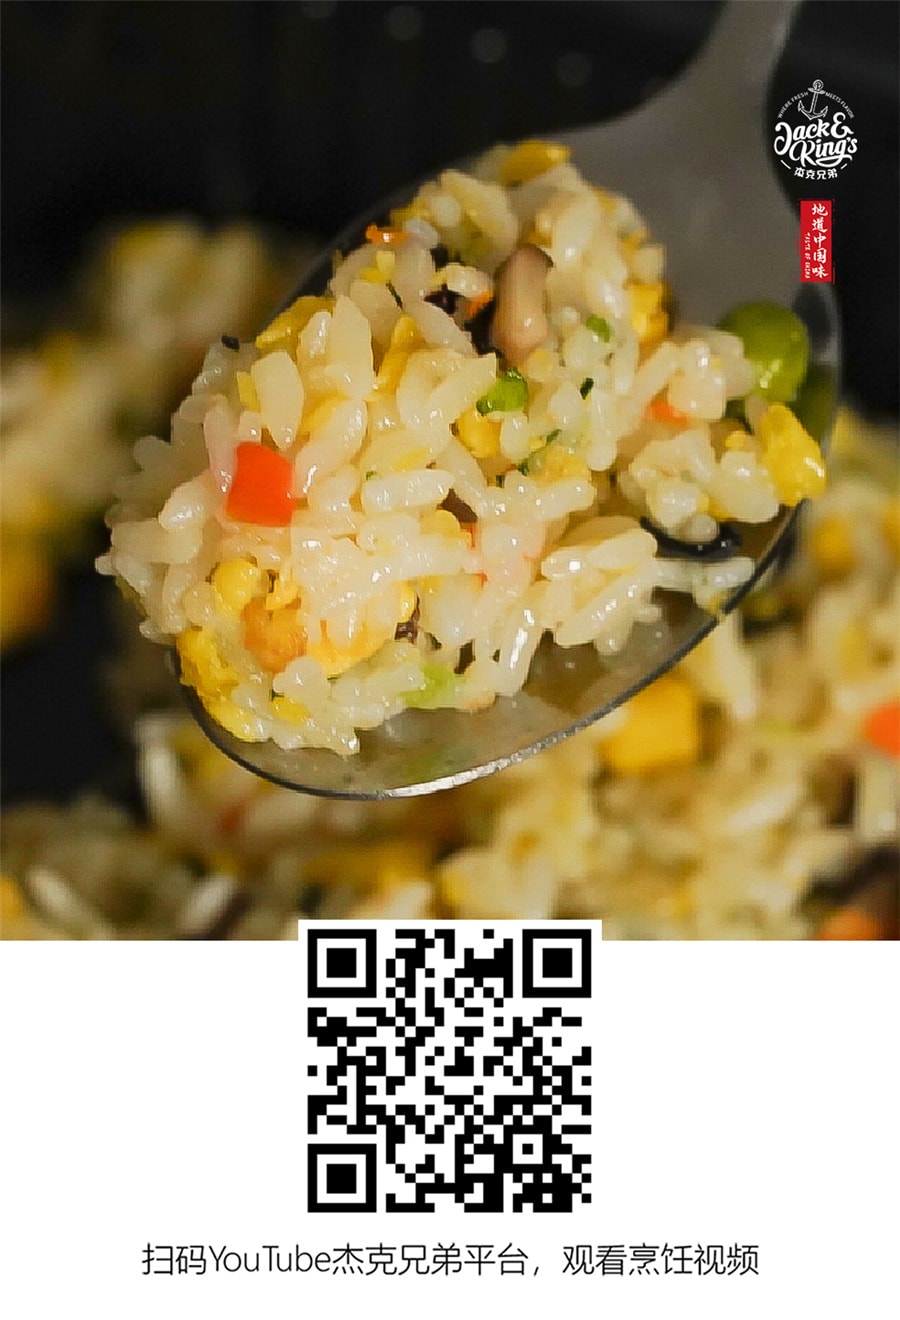 Taste of China Fried RIce with Eggs 300g